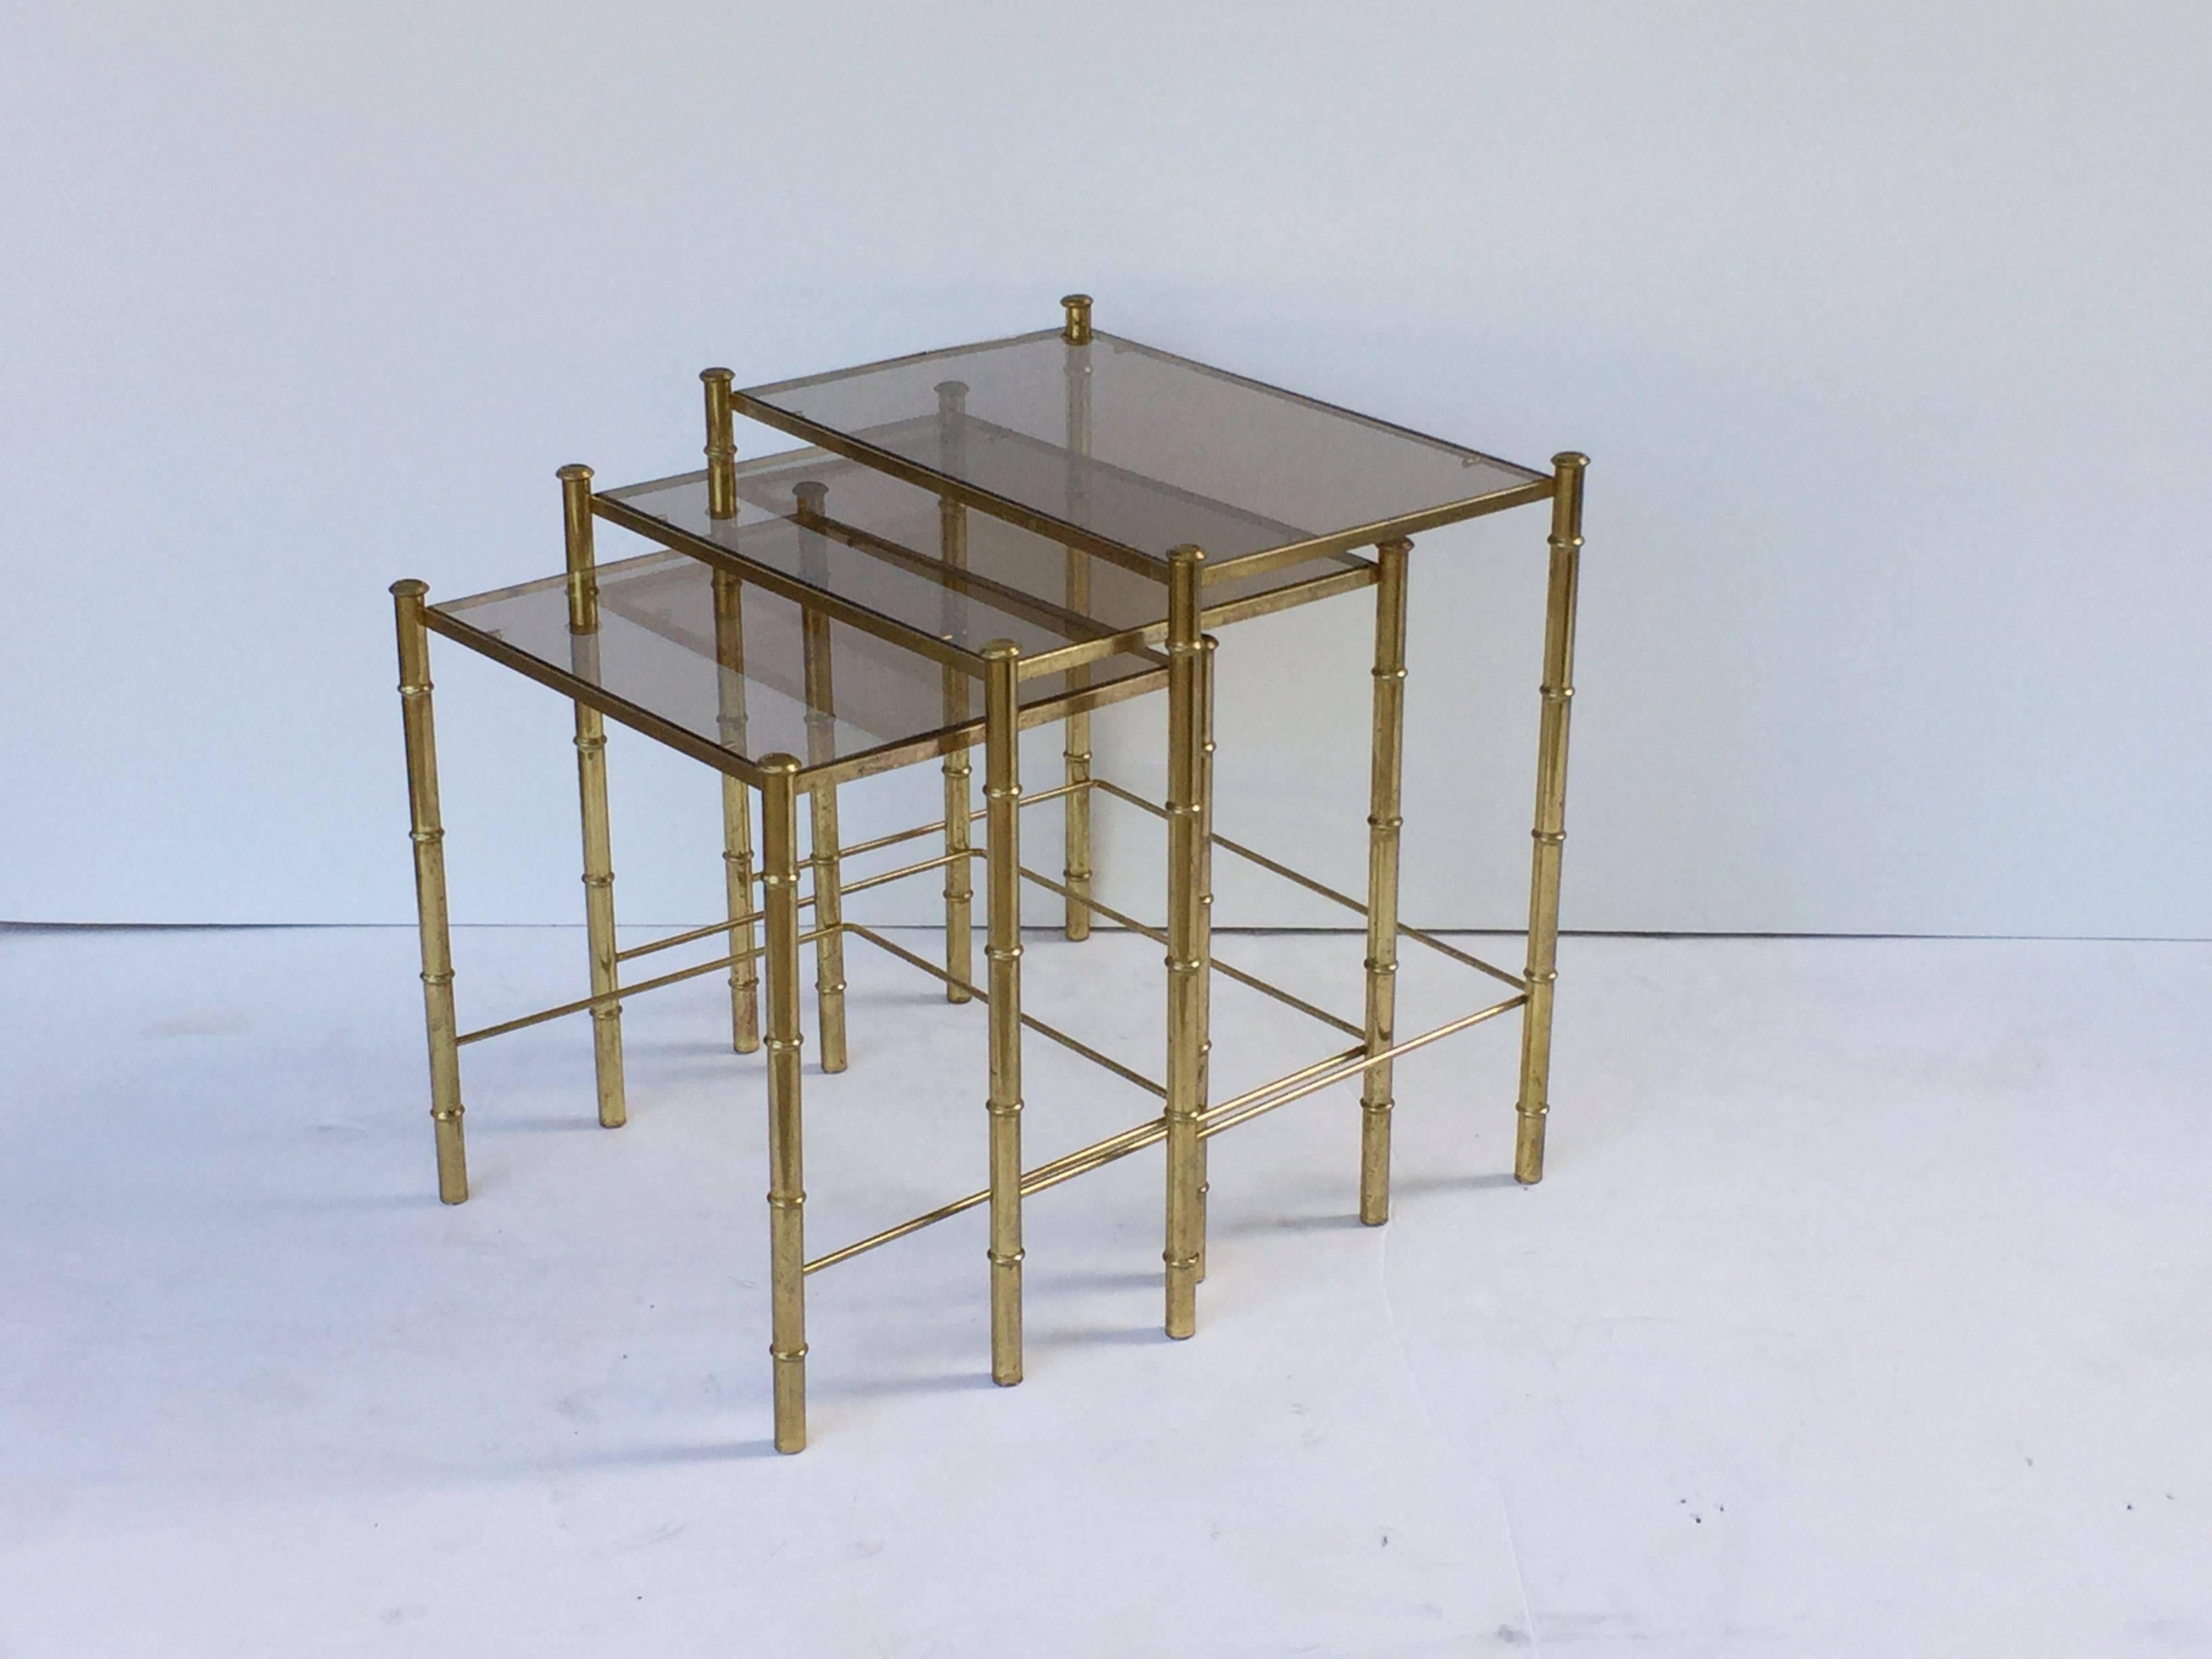 A set of French rectangular nesting low tables featuring three fitted tables, each with a faux bamboo design in gilt metal with inset rectangular smoked glass top.

Great for use as cocktail or coffee tables as well.

Measures:
Large table